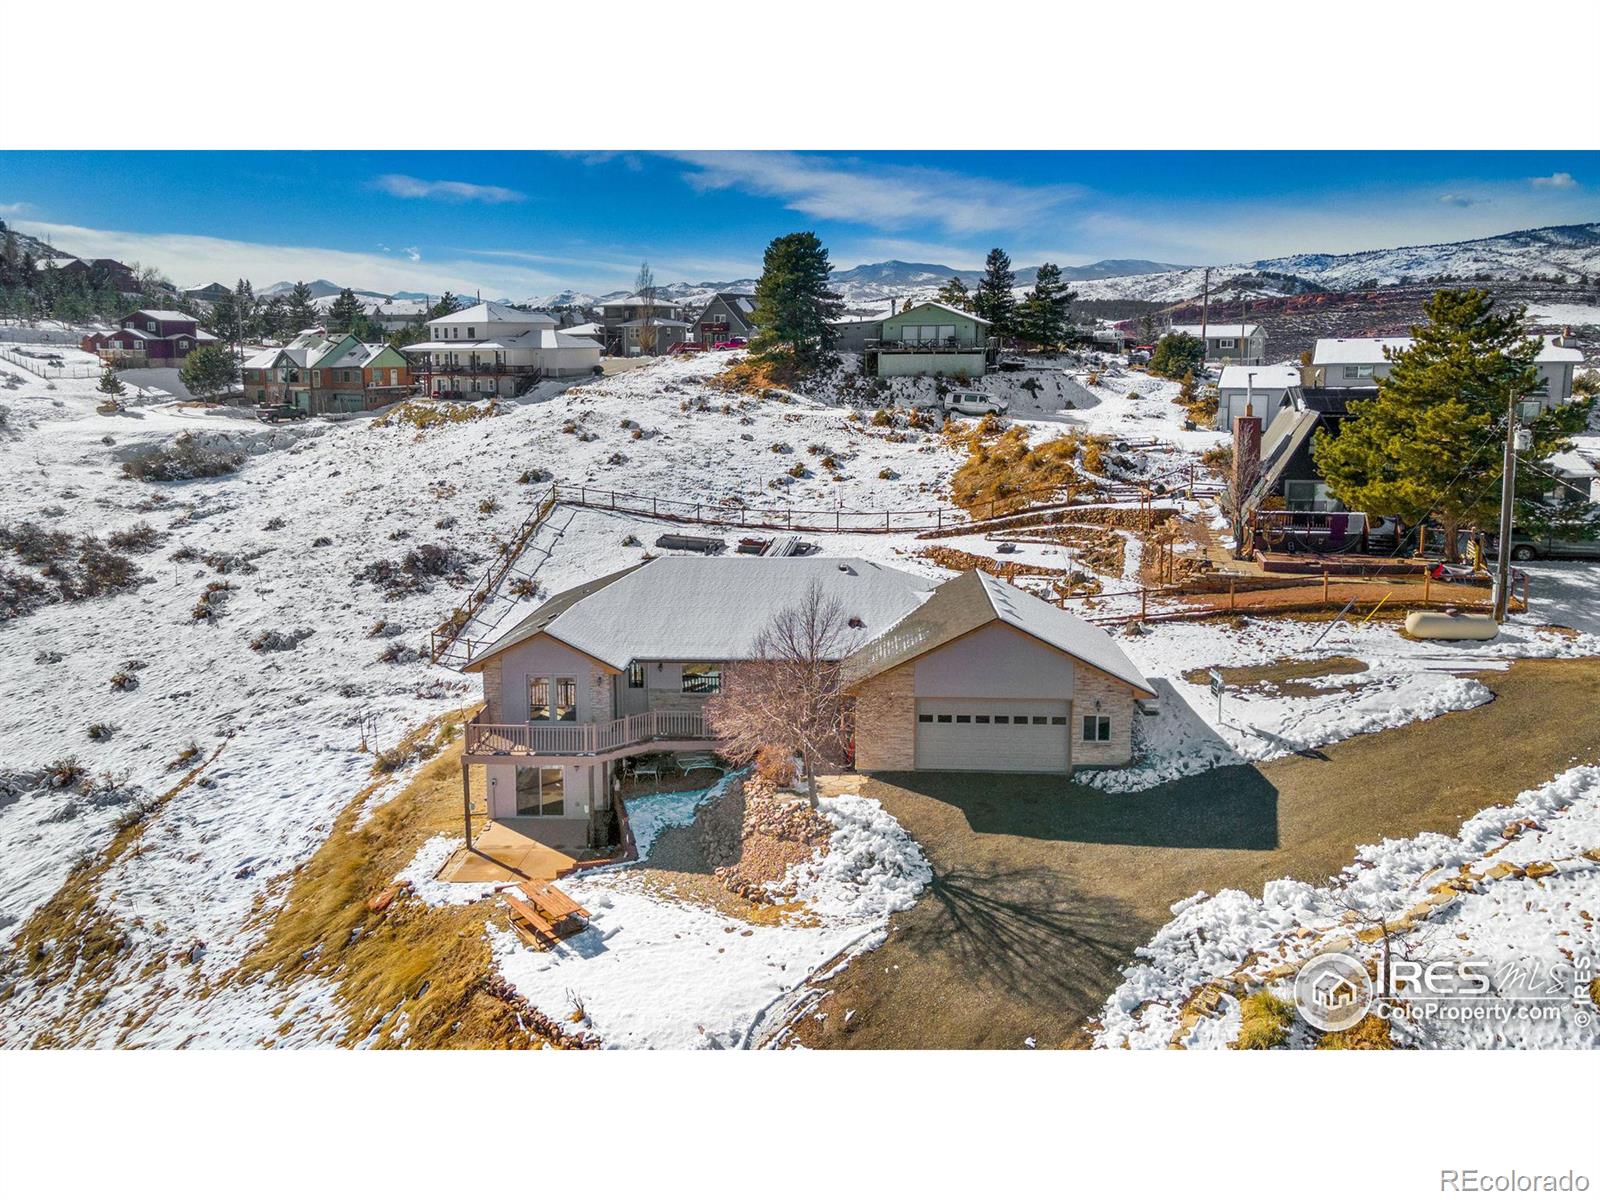 4608  Cliff View Lane, fort collins MLS: 4567891002549 Beds: 4 Baths: 4 Price: $785,000